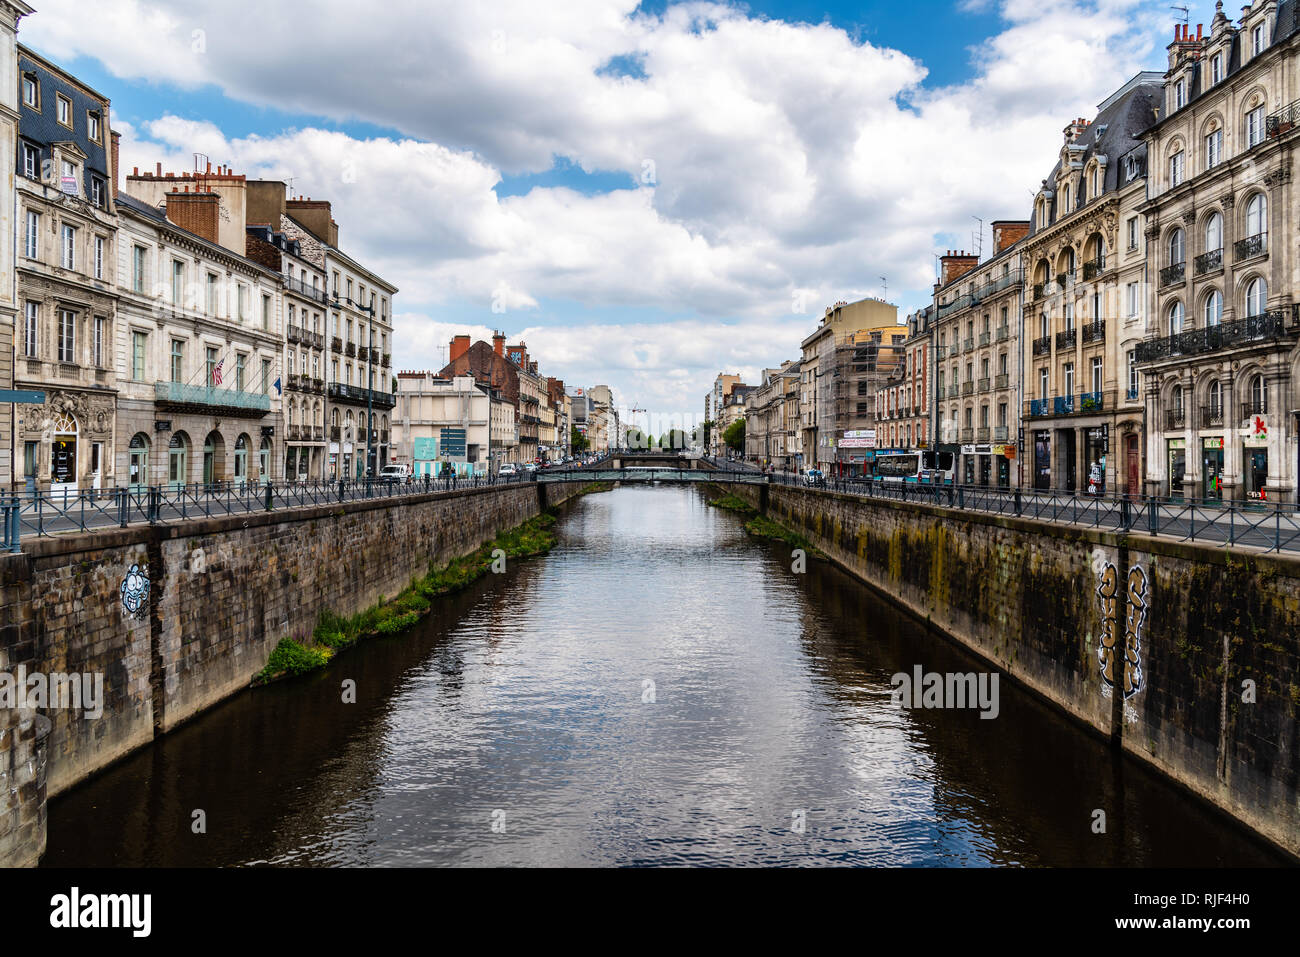 Rennes, France - July 23, 2018: Scenic view of River Vilaine in Rennes Stock Photo